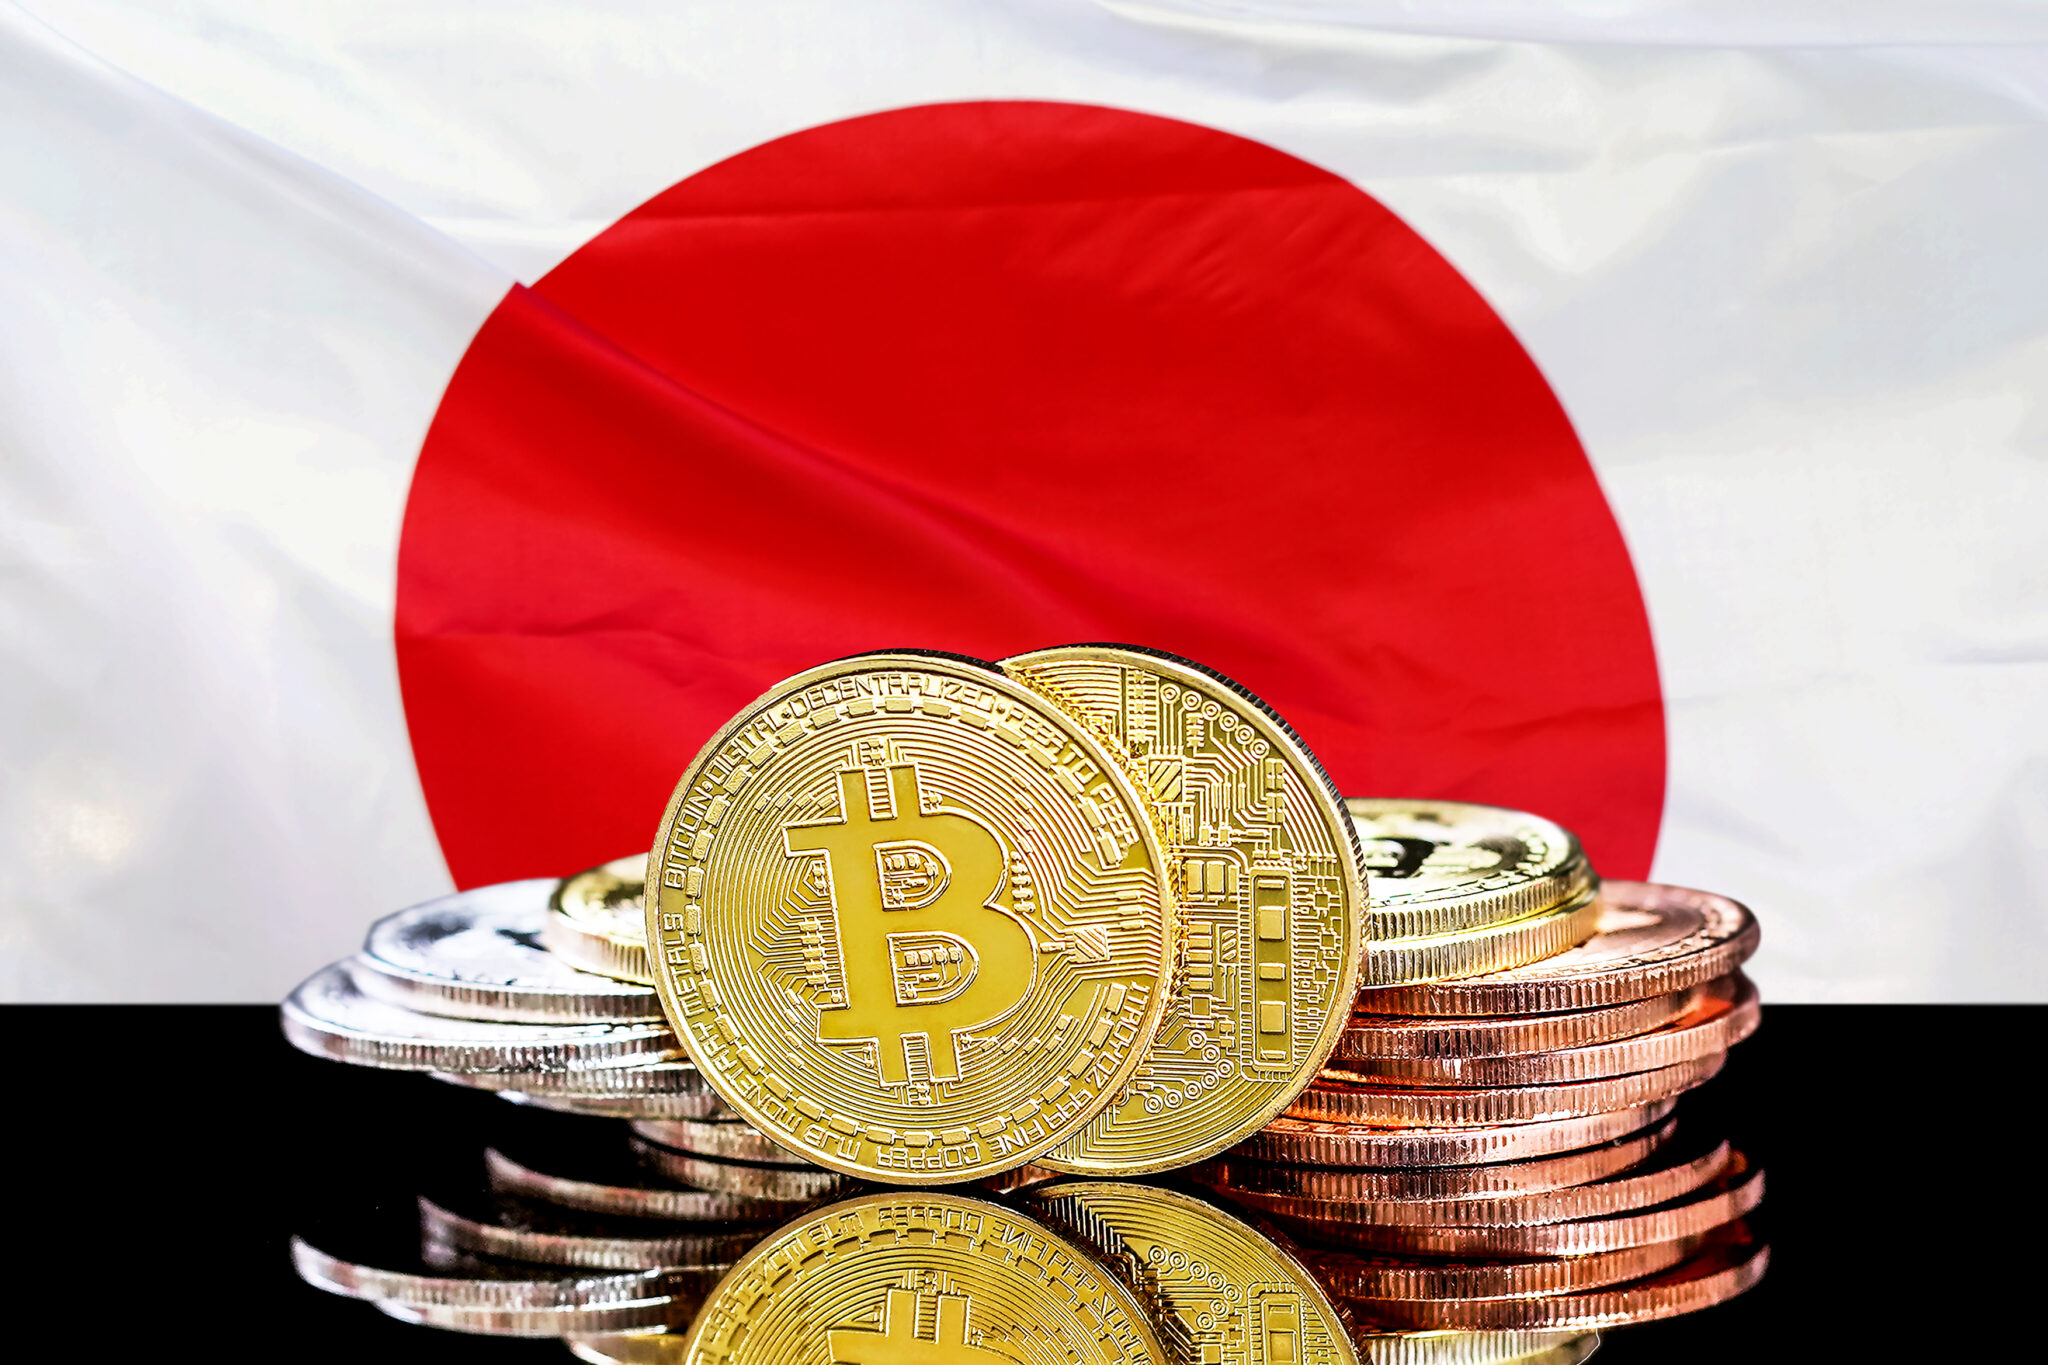 Bitcoins and the flag of Japan.